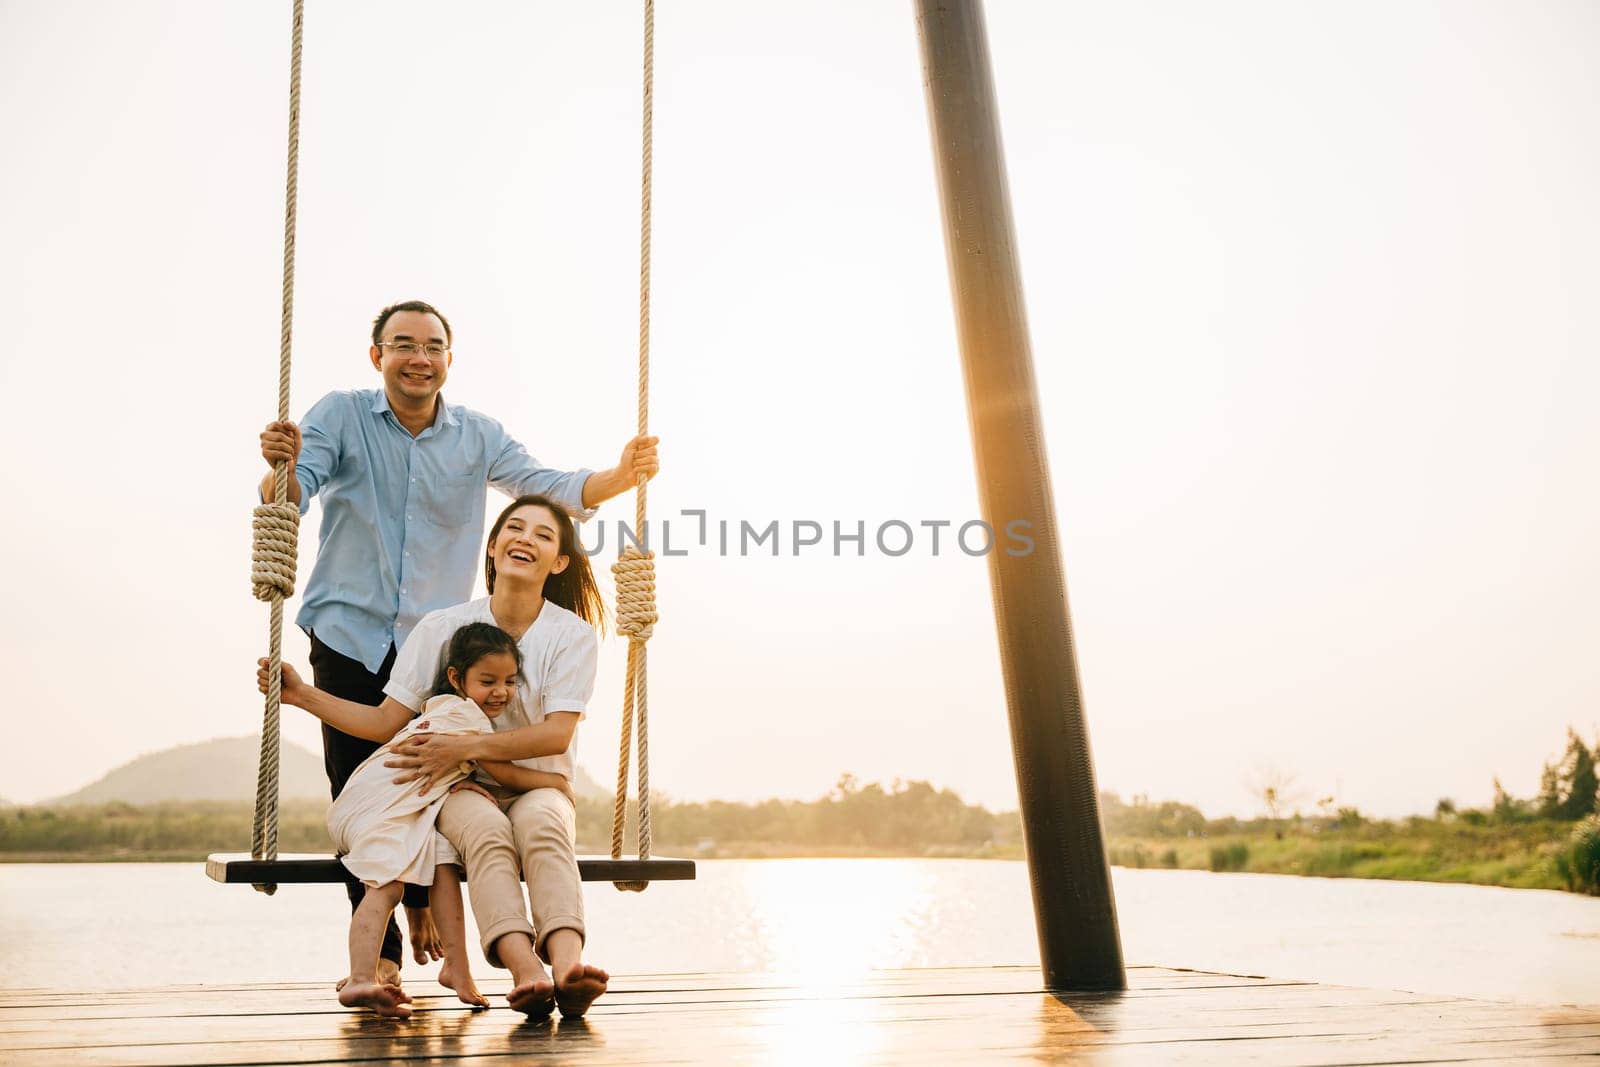 A happy family enjoying a sunny day at the park playground, with the father sitting and pushing the swing while the mother and daughter play together, Happy Family Day